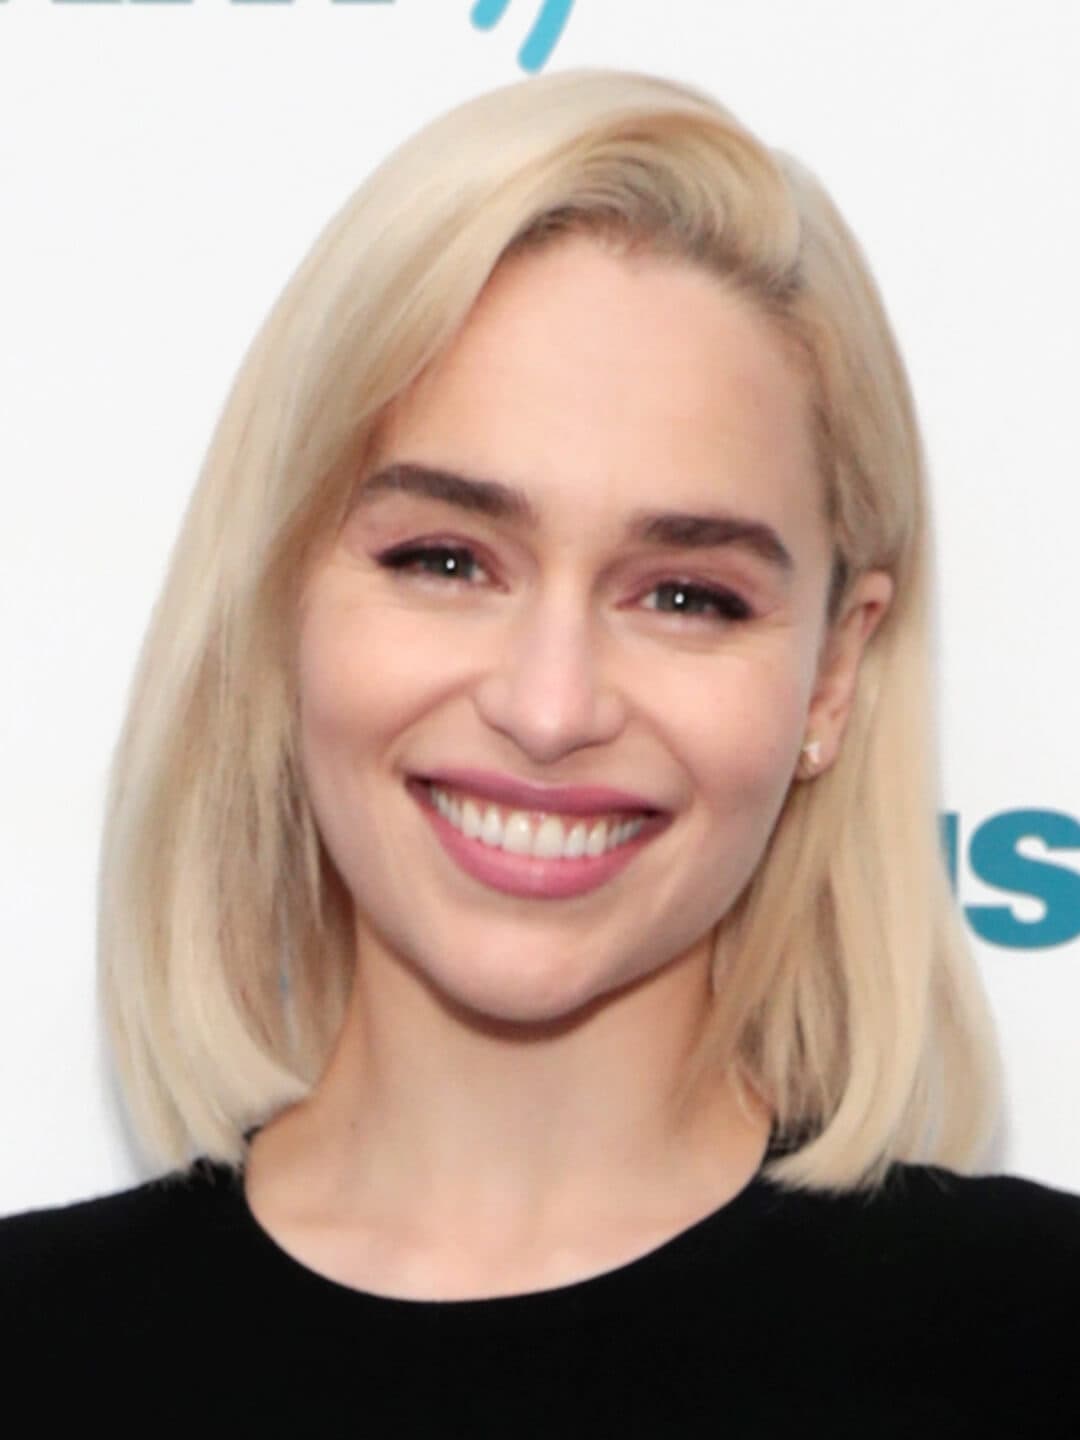 Emilia Clarke smiling and rocking a blunt lob hairstyle